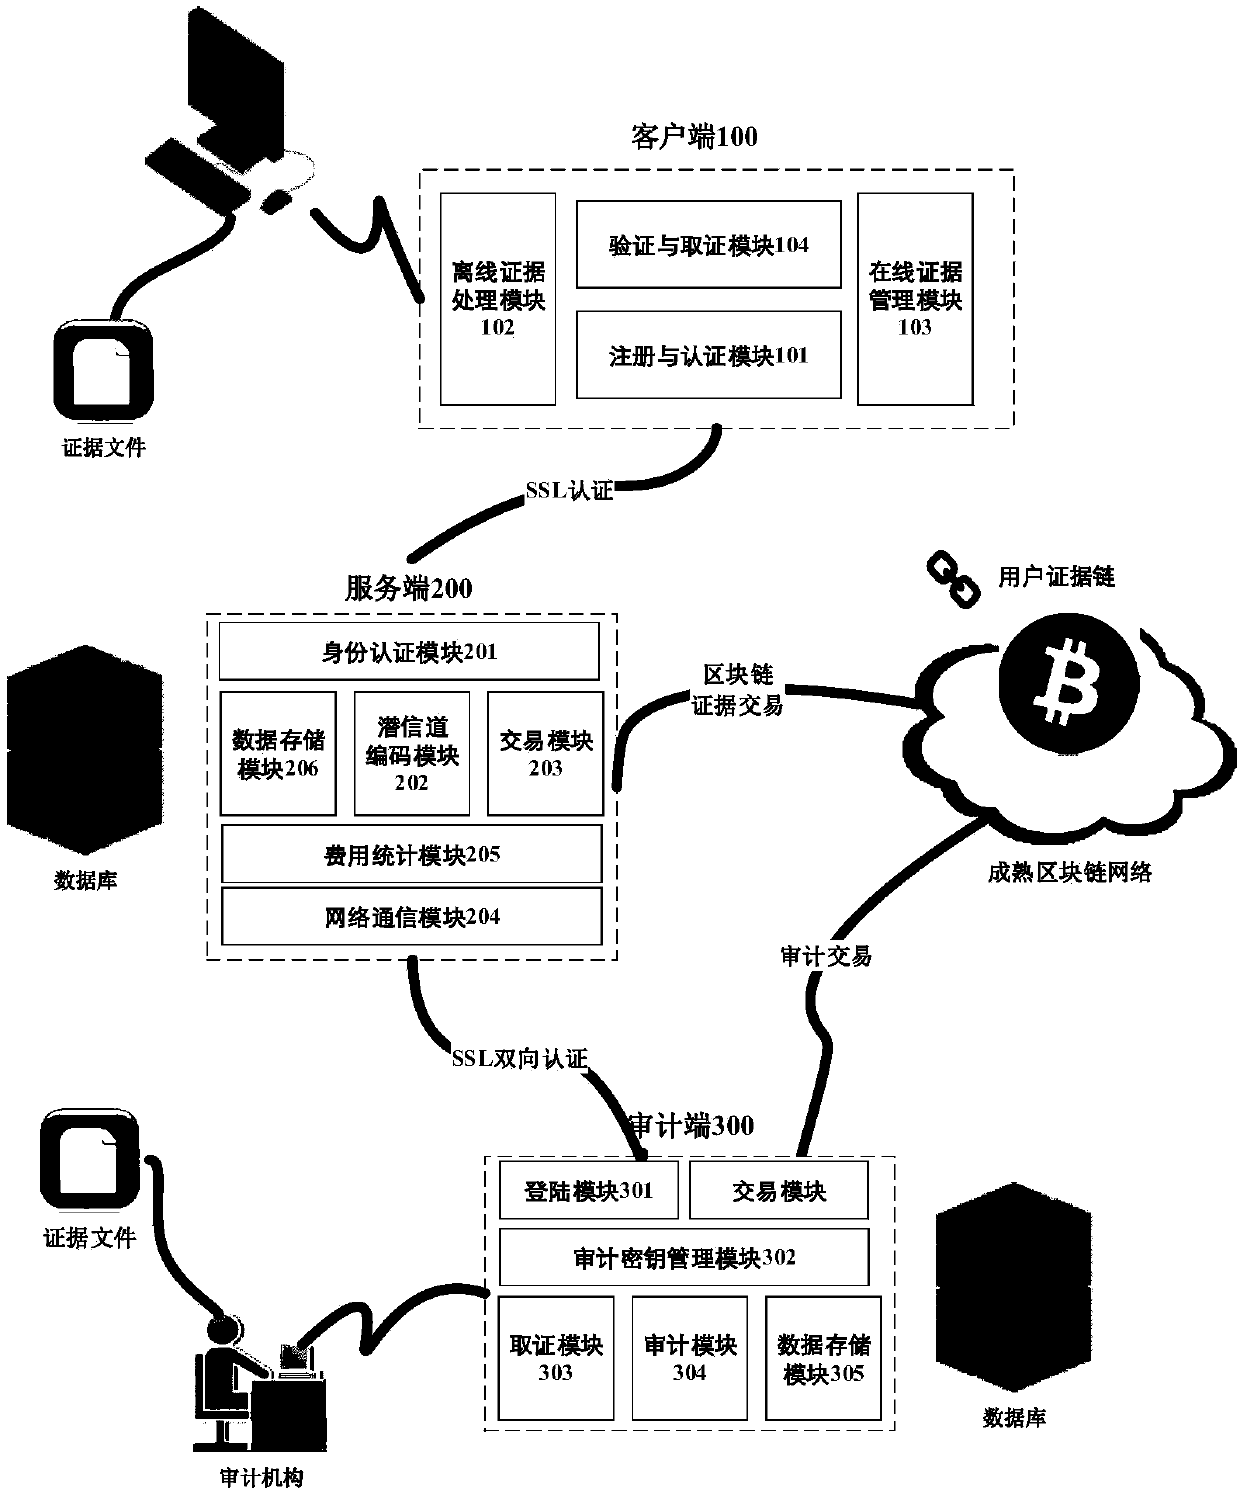 Electronic evidence preservation system based on block chain subliminal channel technology